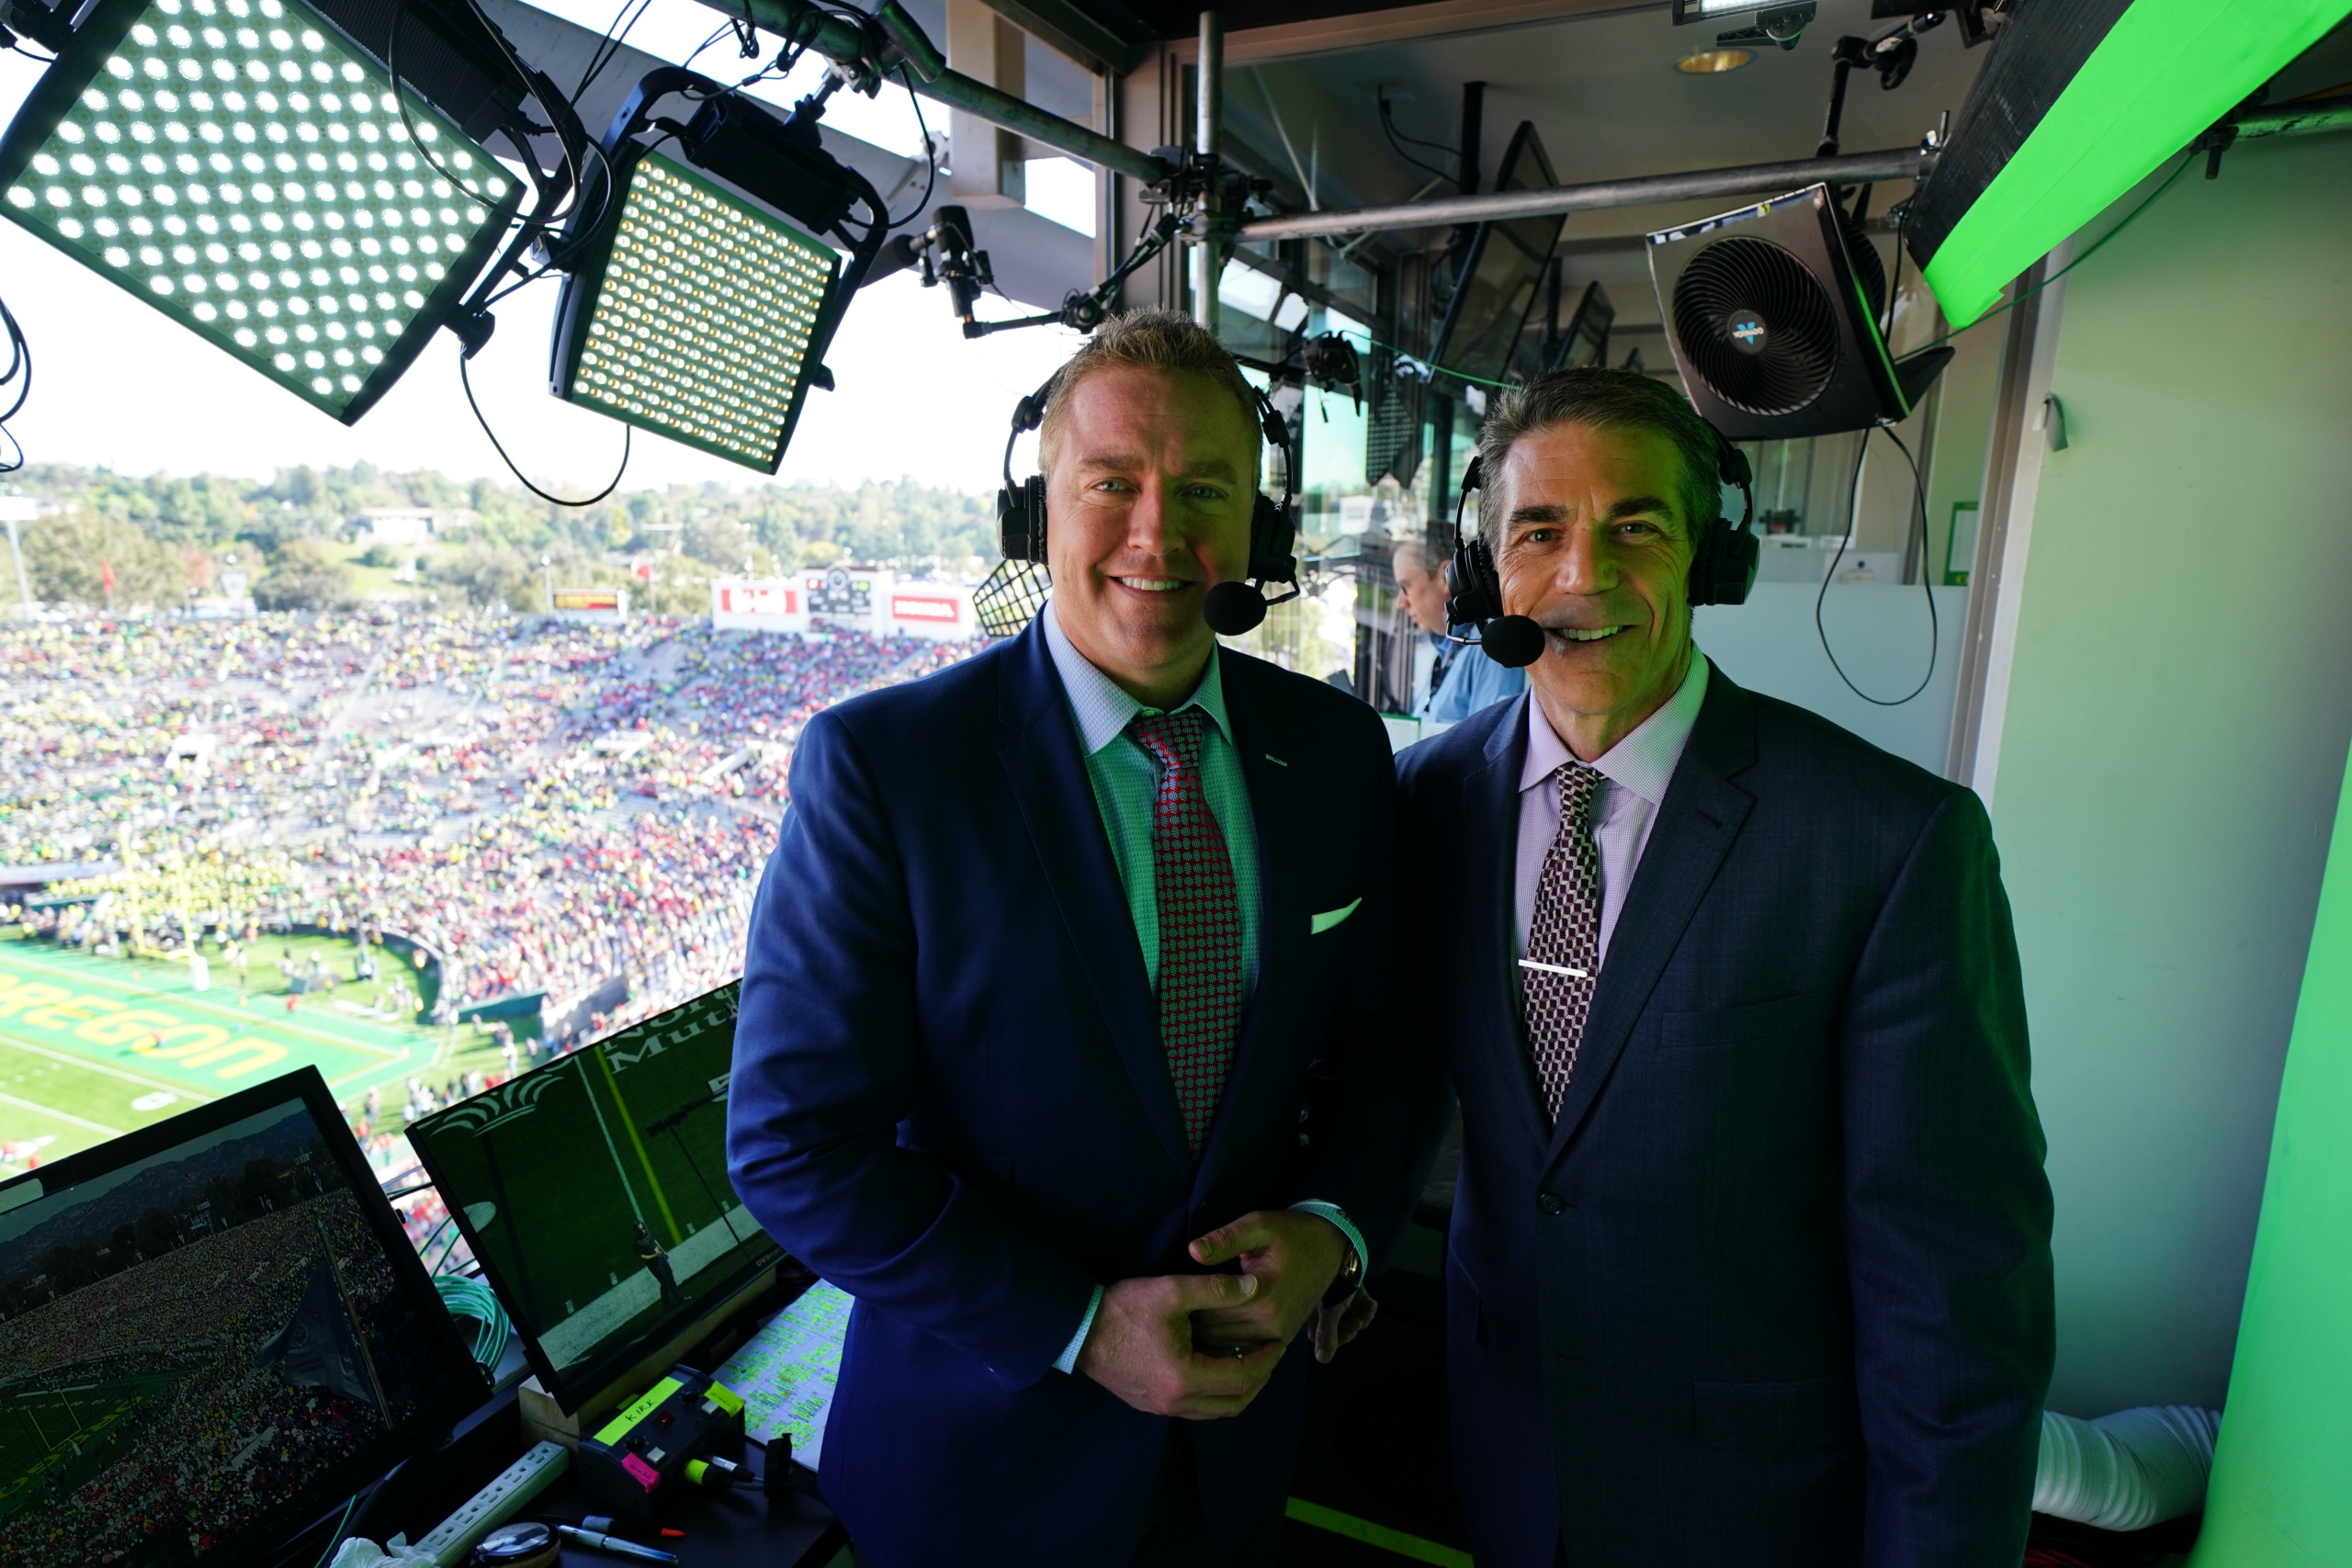 Prime Video's NFL crew has made smooth transition to